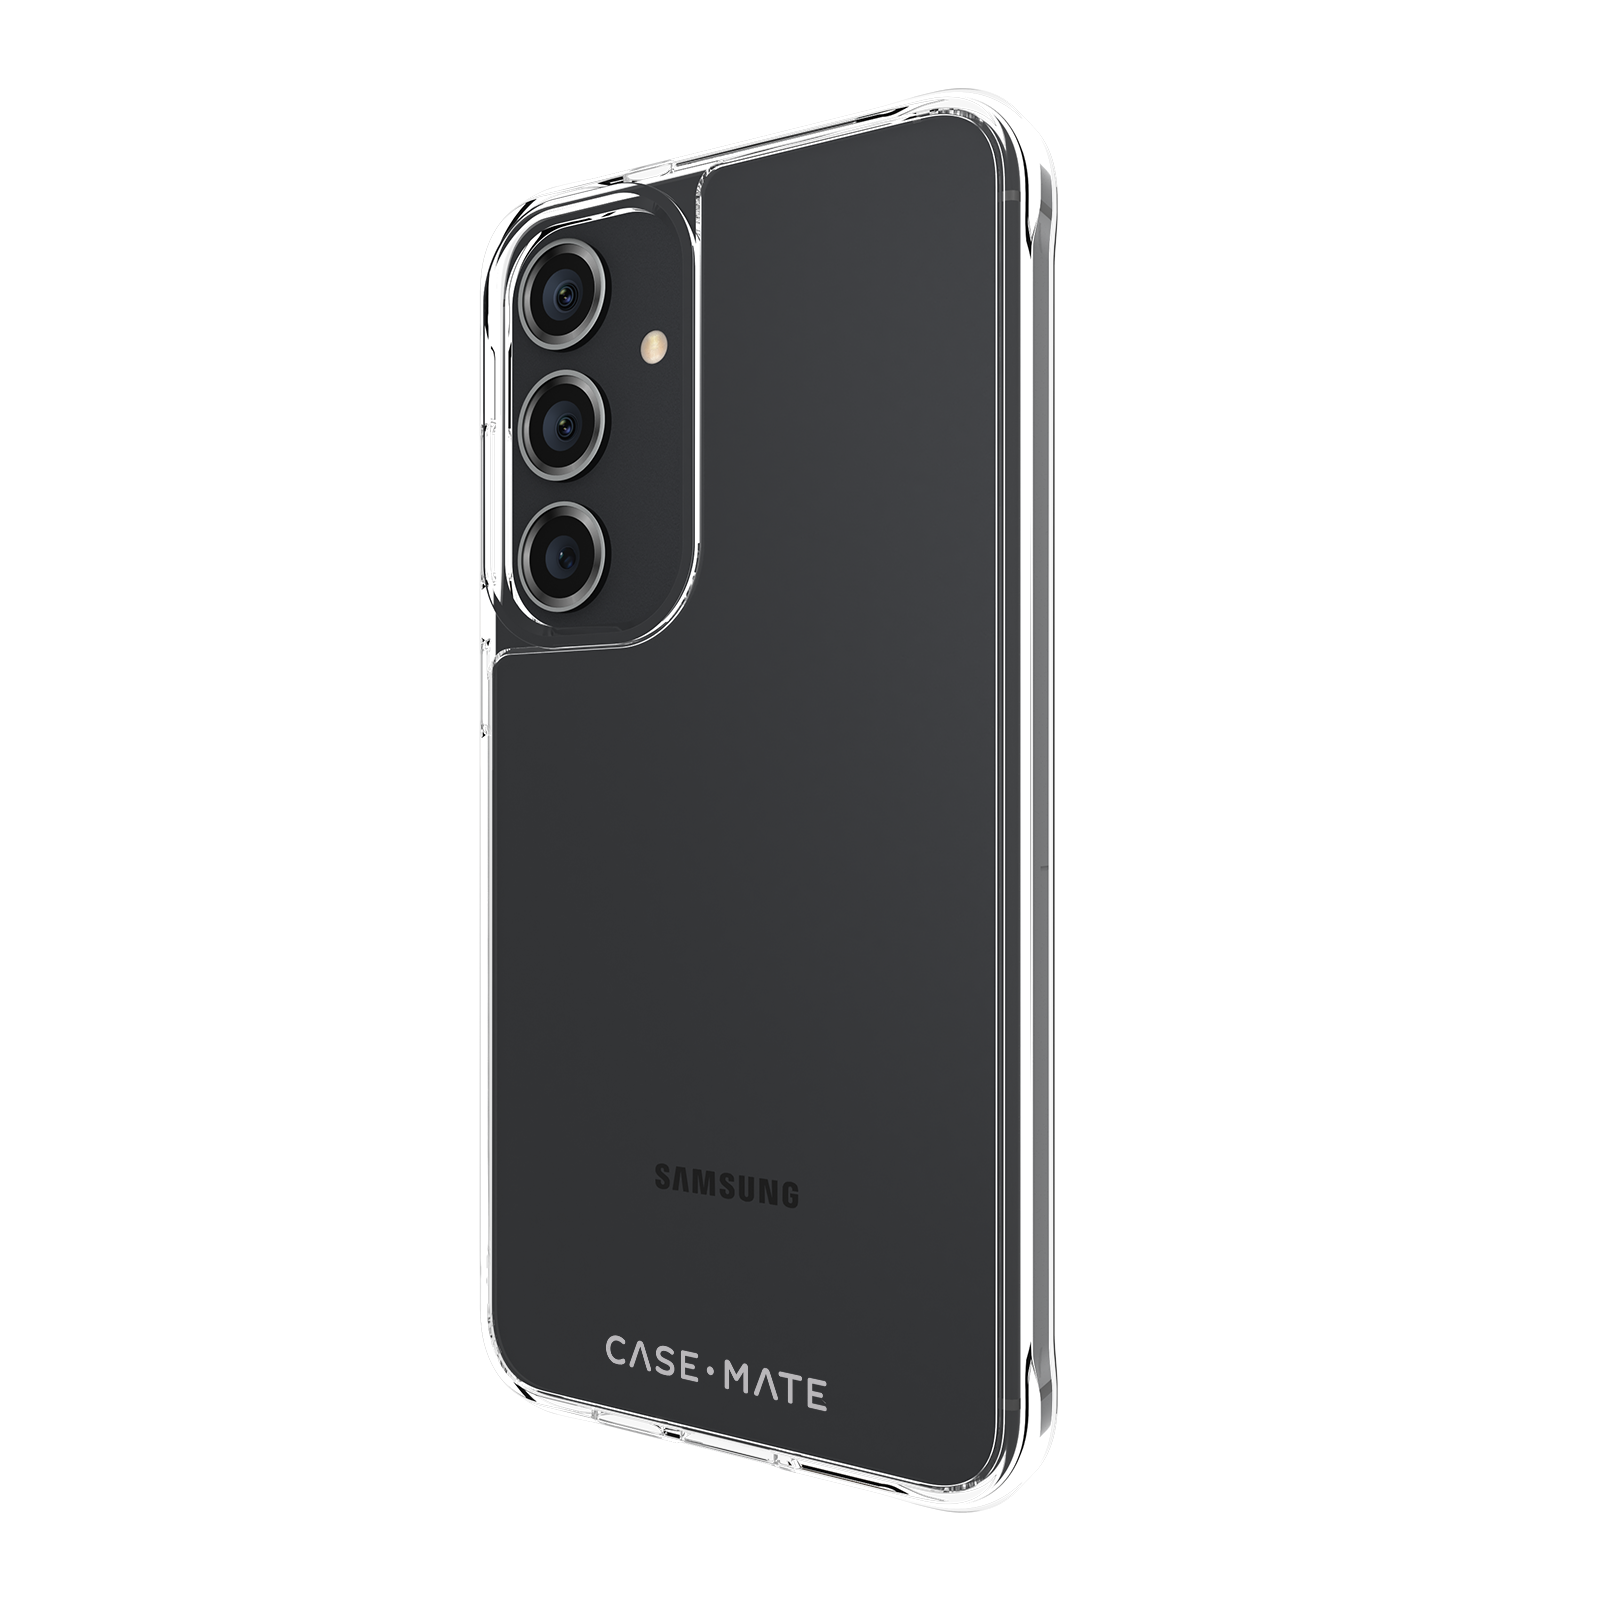 CASE-MATE Tough S24+, Backcover, Clear, Transparent Galaxy Samsung